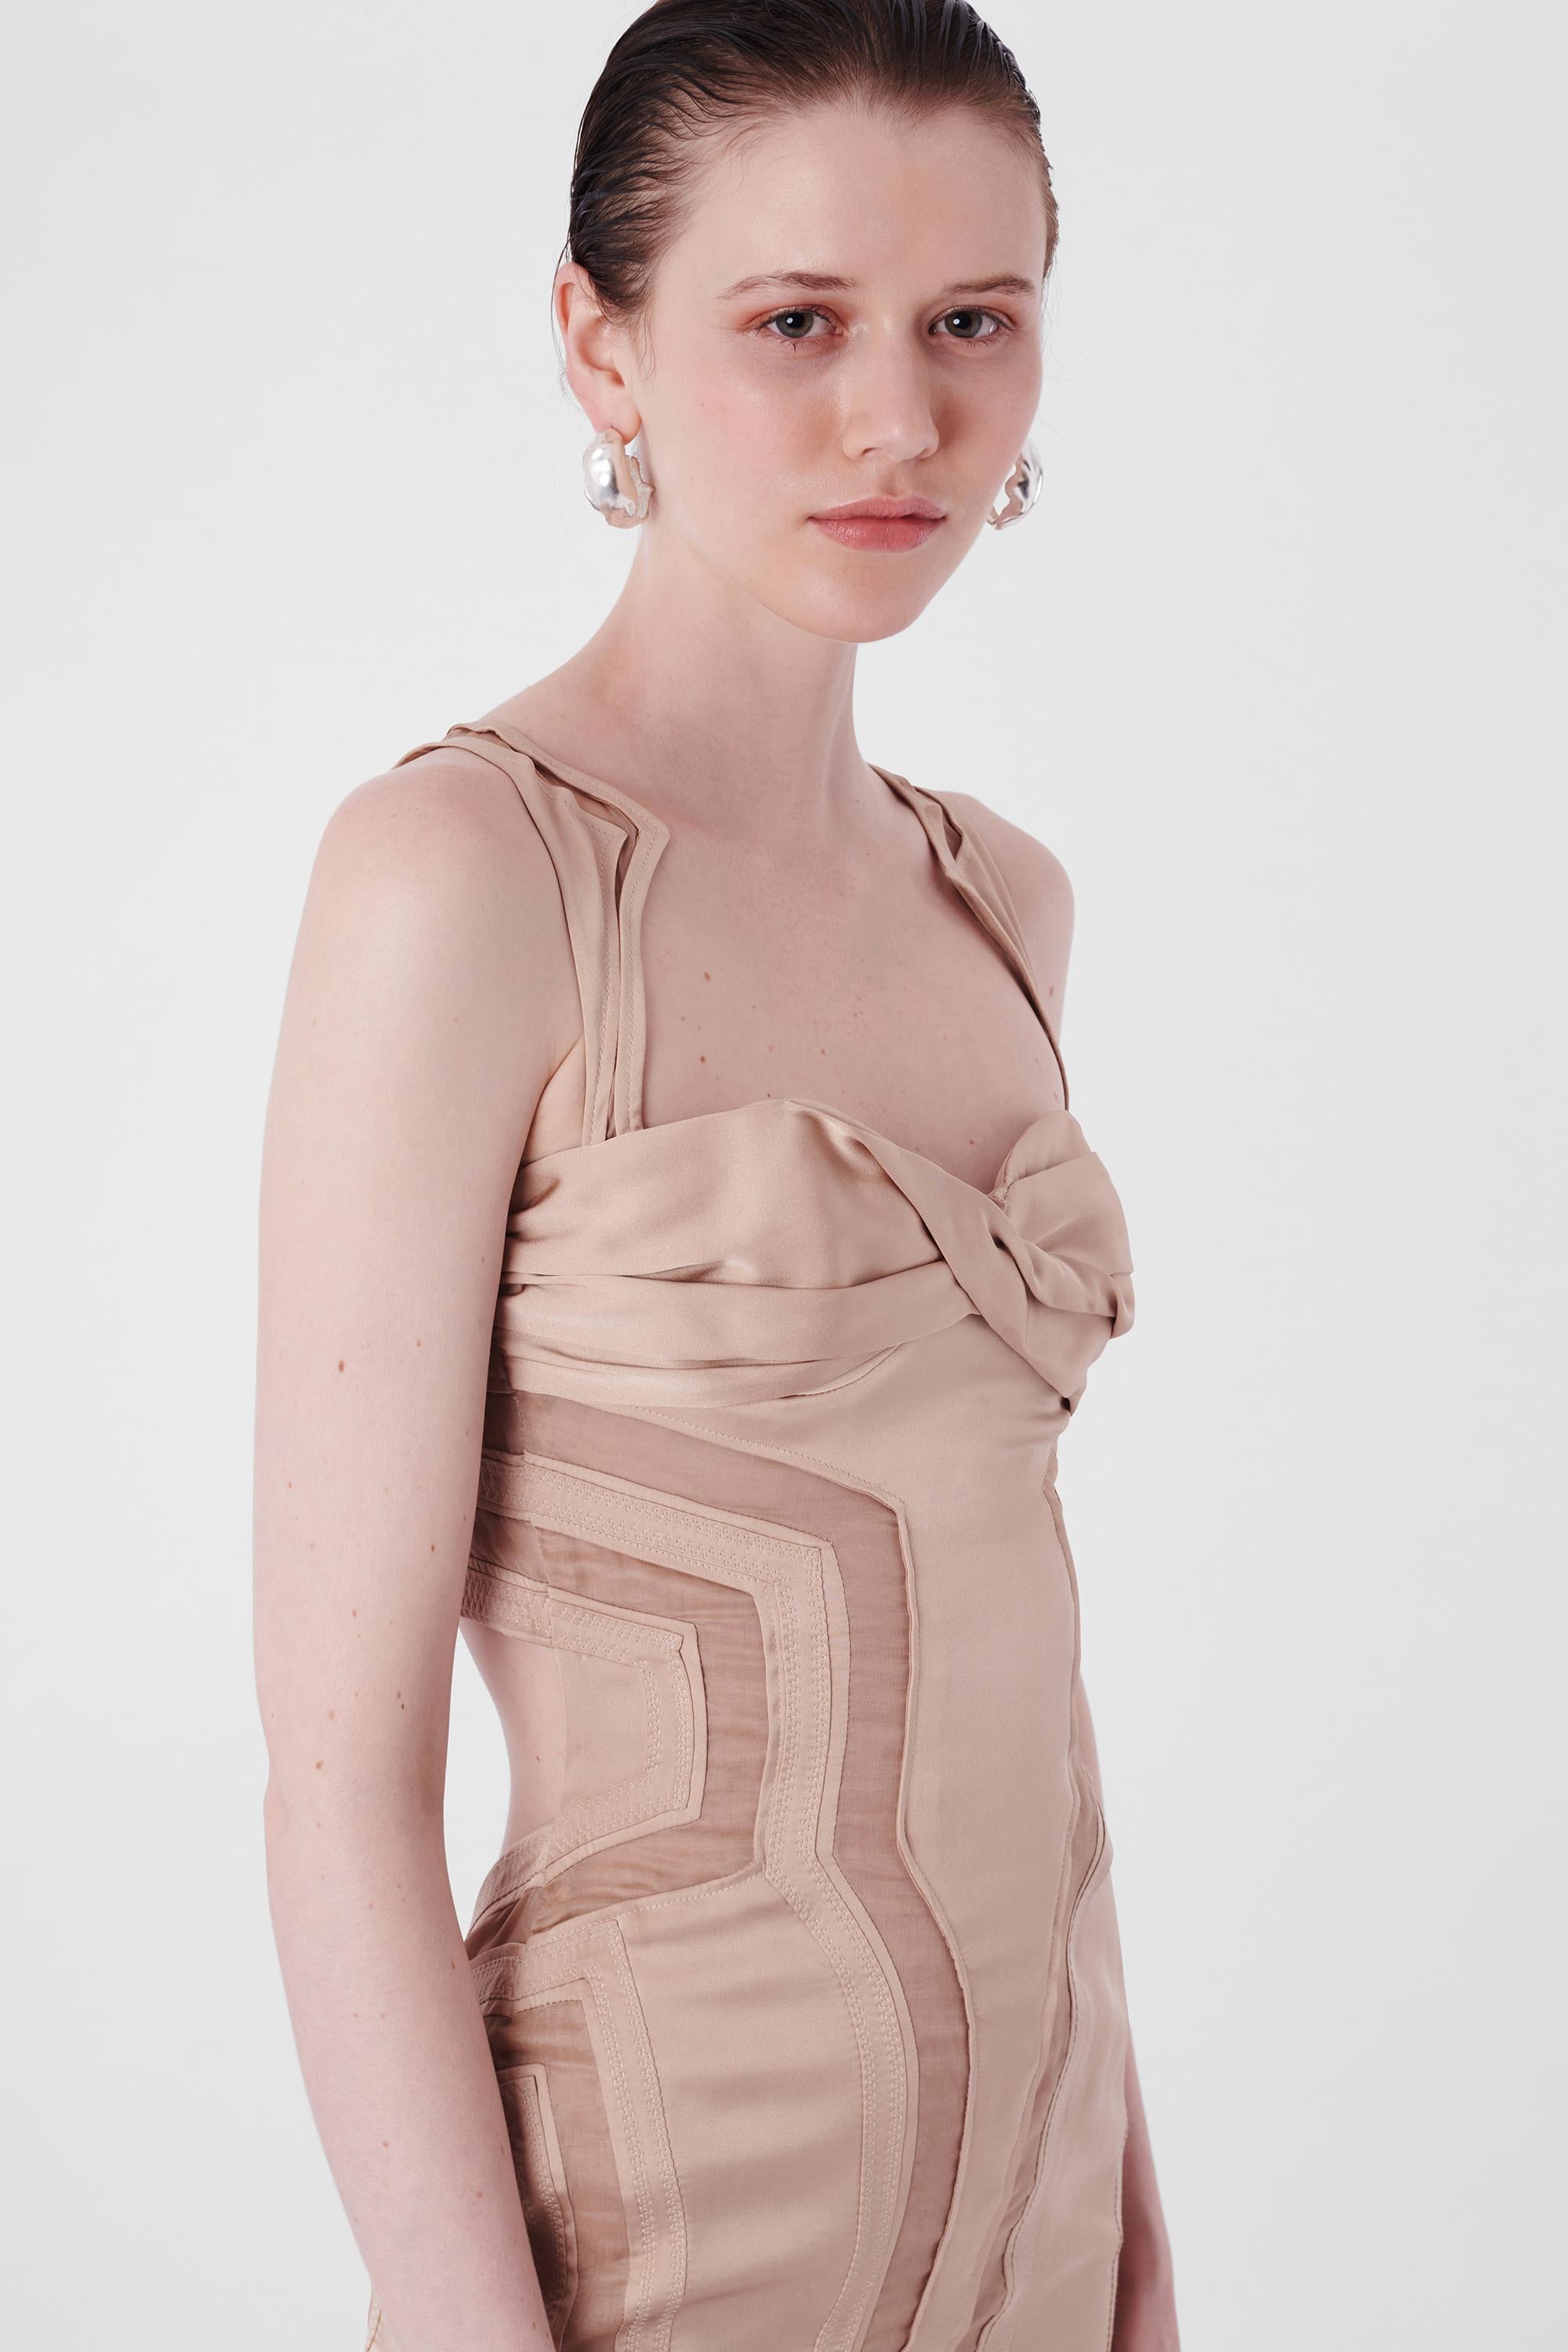 Gucci S/S 2005 Runway Nude Cutout Dress In Good Condition In London, GB